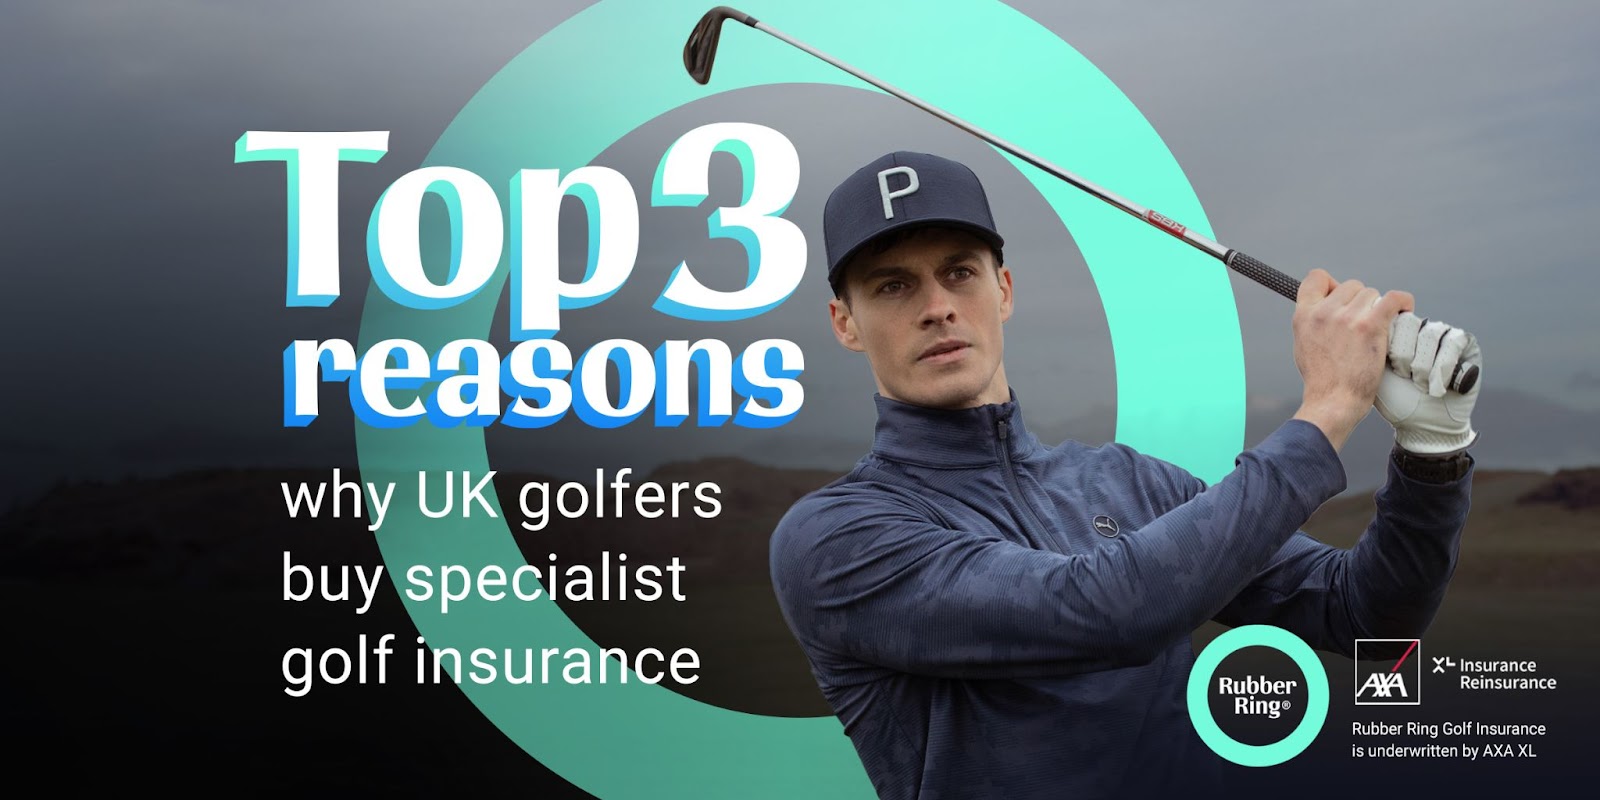 3 reasons why golfers in the UK should consider buying a specialist golf insurance image